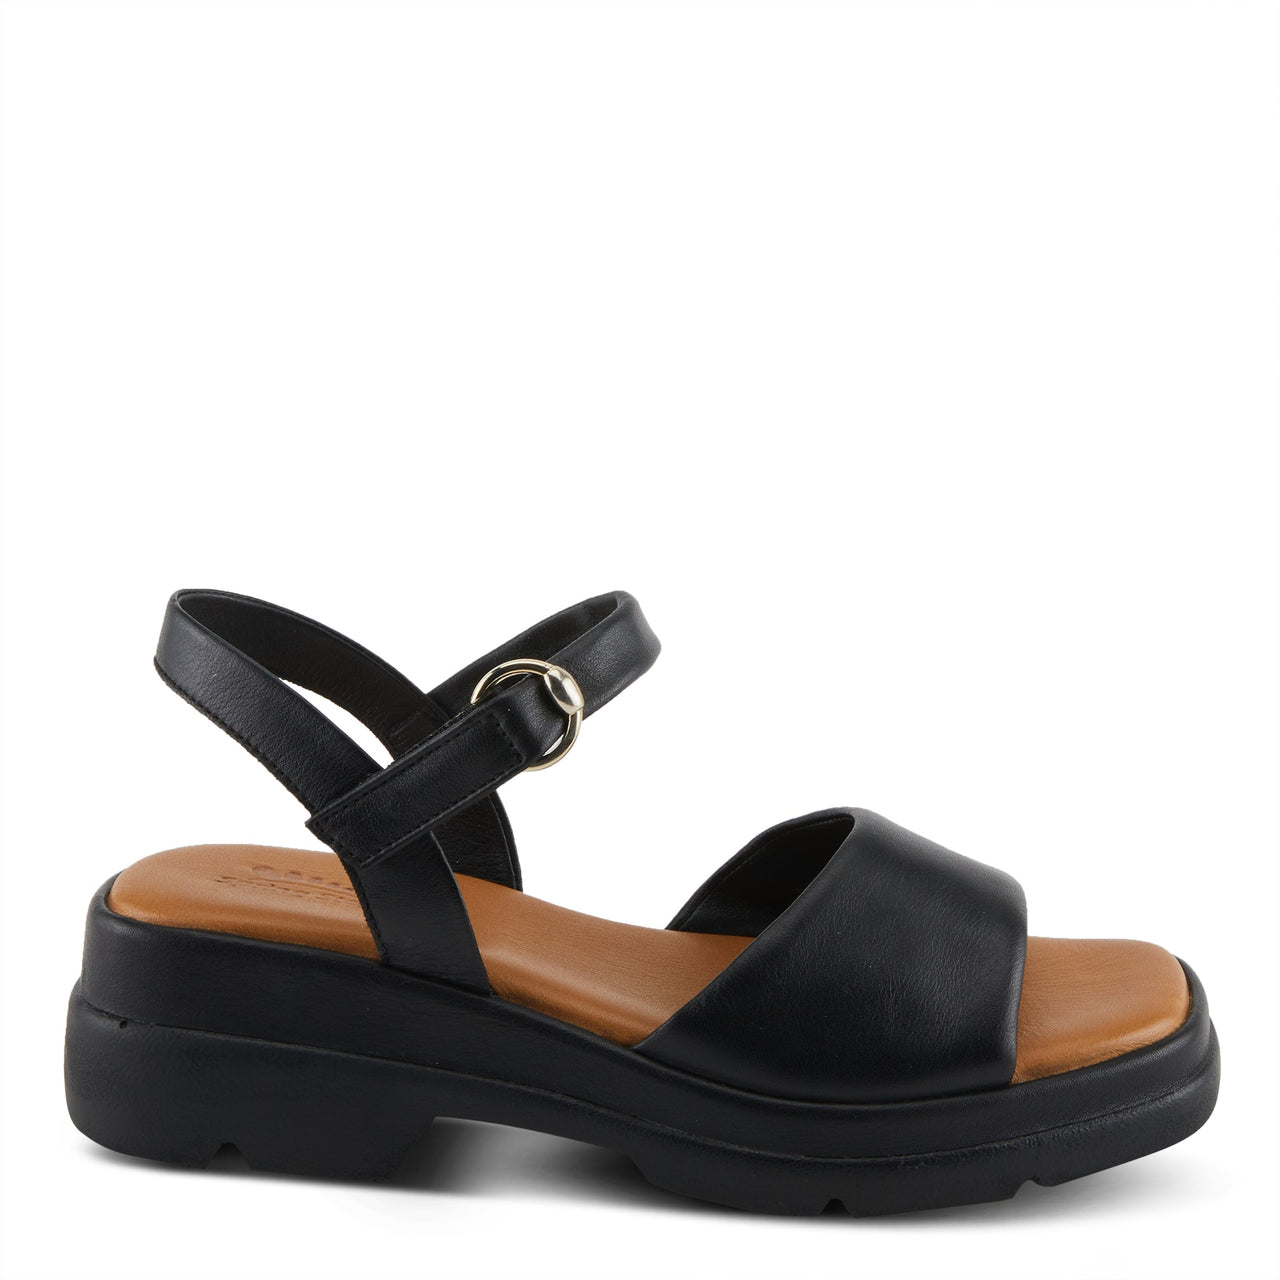 Spring Step Huntington Sandals with slip-resistant rubber outsole